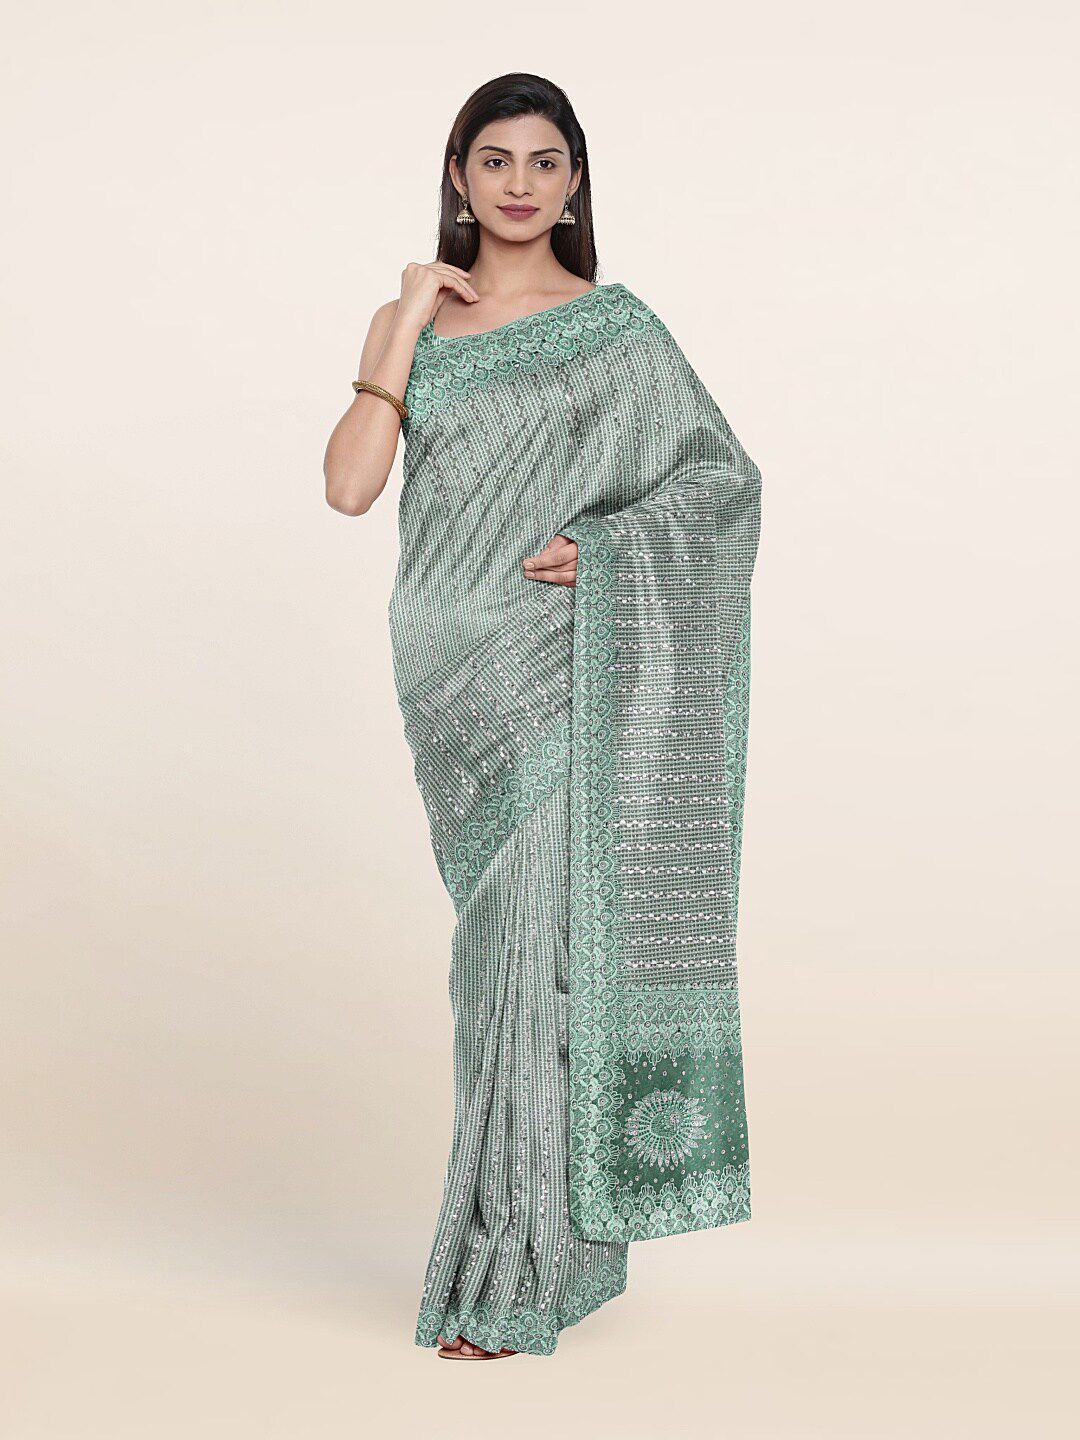 Pothys Green Floral Beads and Stones Saree Price in India